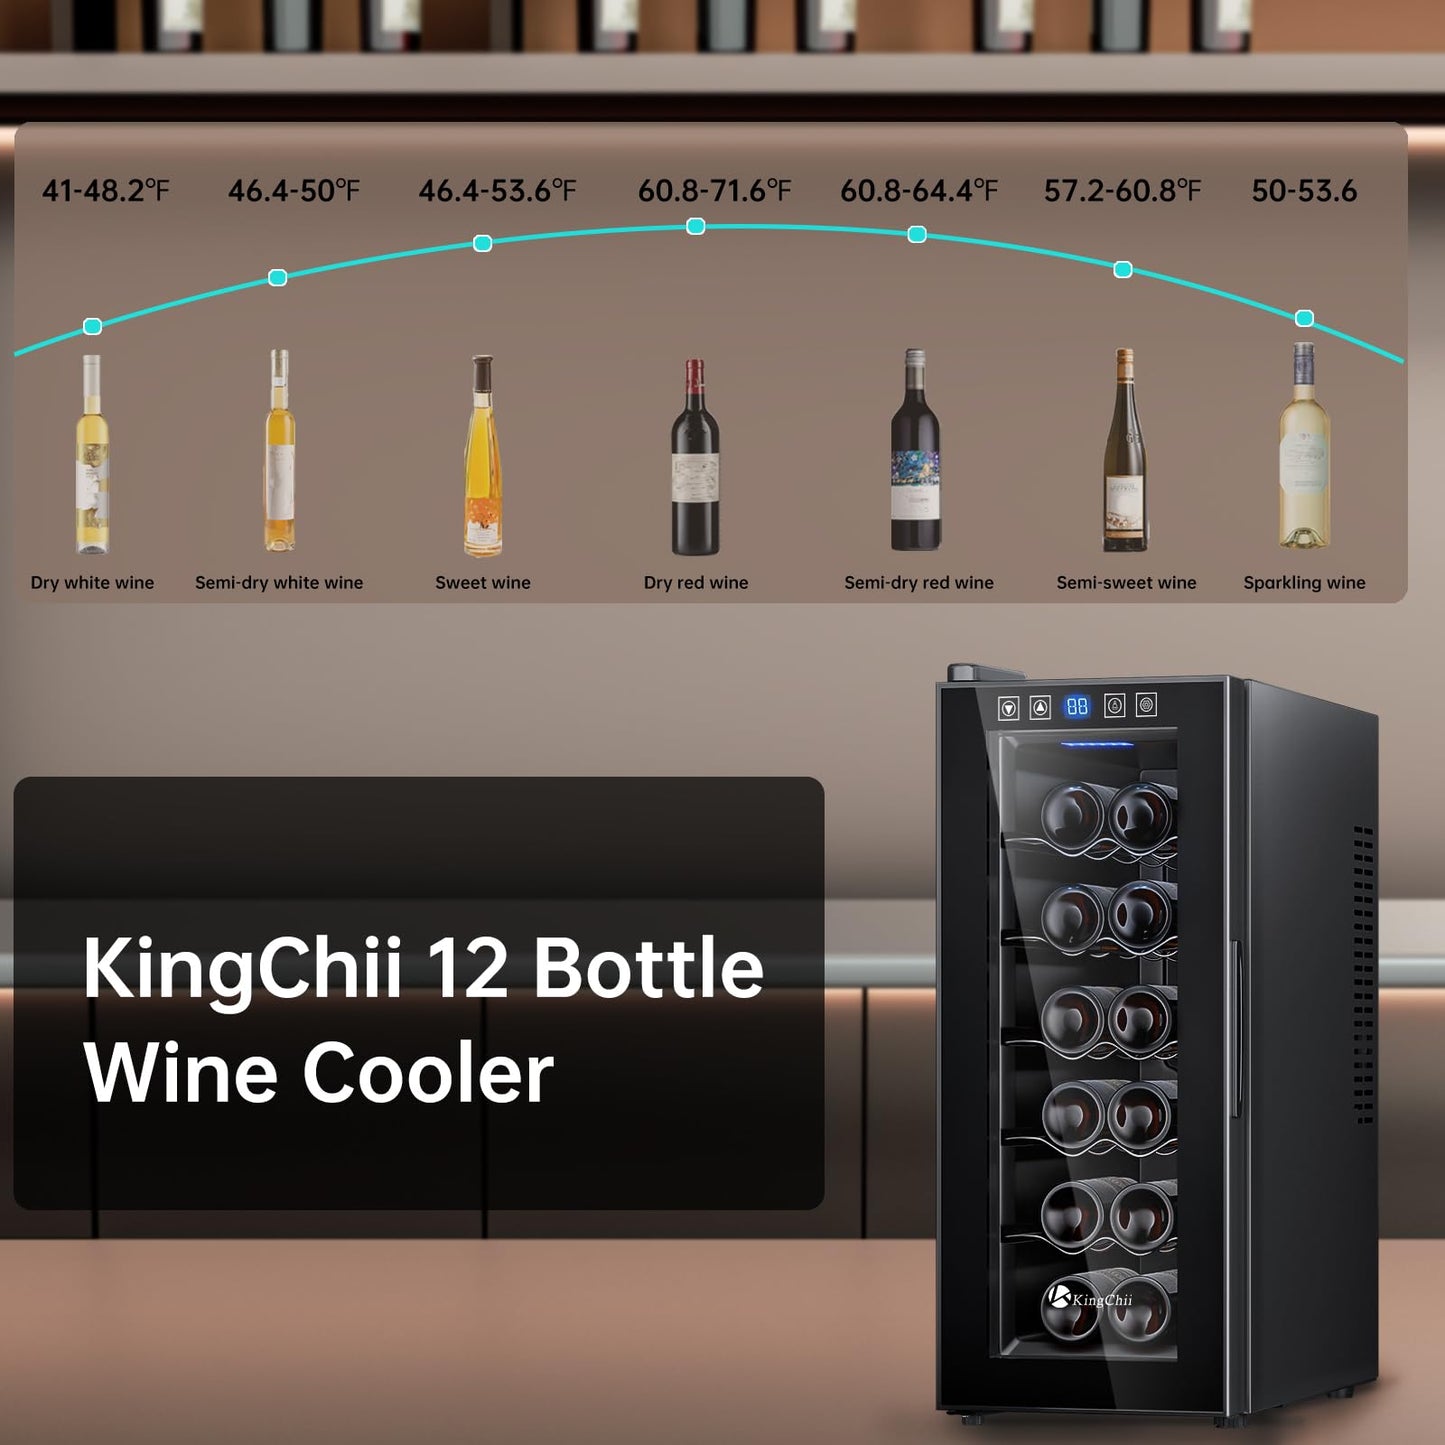 KingChii 12 Bottle Thermoelectric Wine Cooler Refrigerator Advanced Cooling Technology, Stainless Steel & Tempered Glass For Red Wine, Champagne for Home, Kitchen, or Office